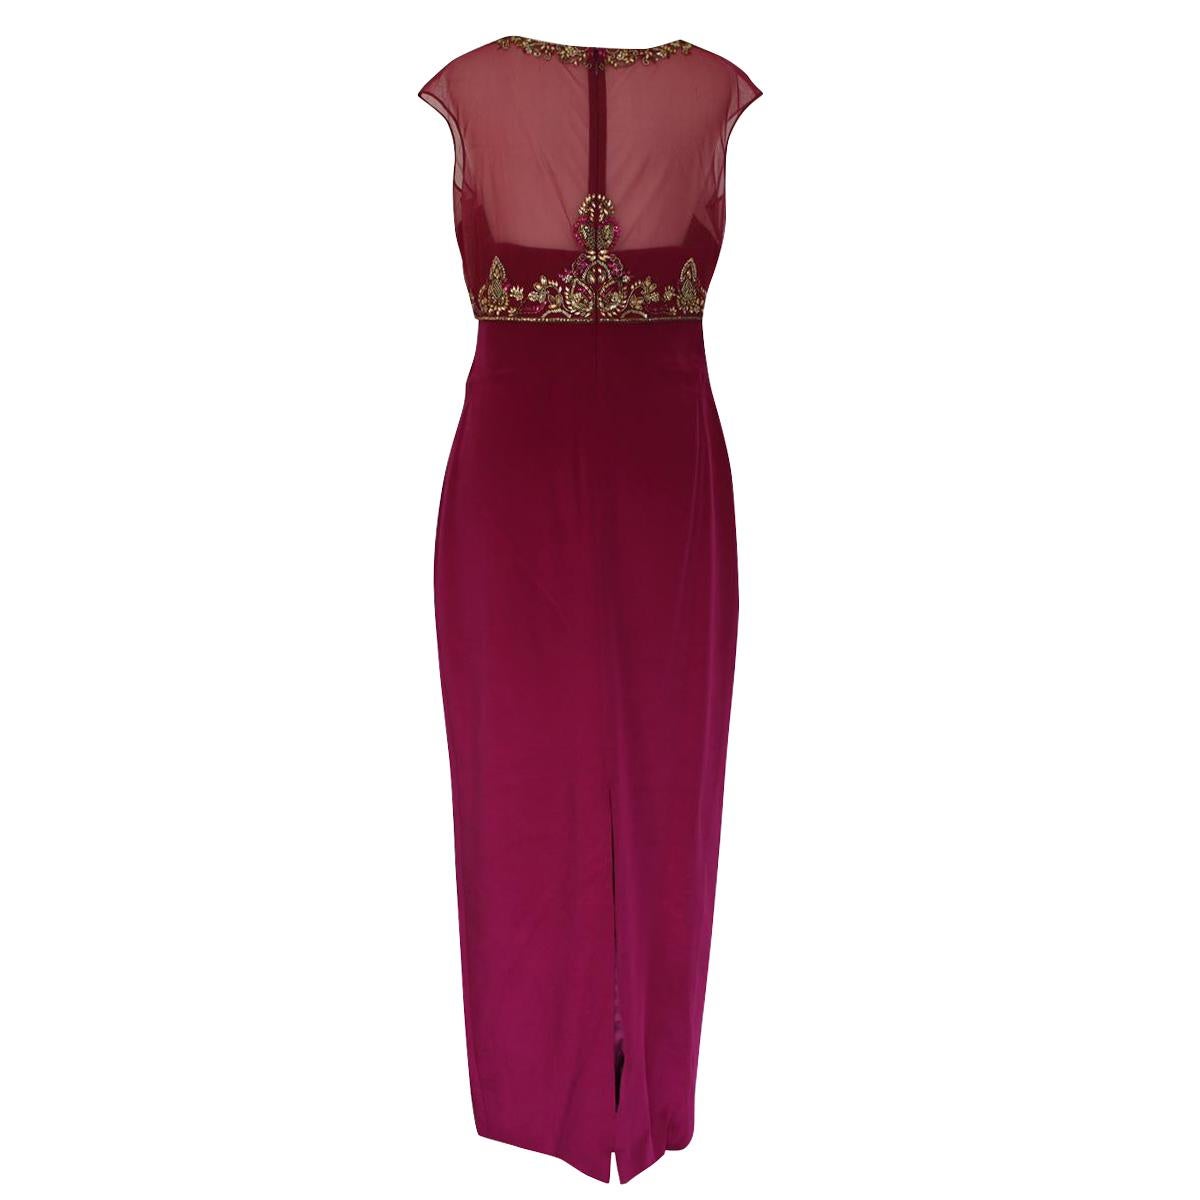 Super elegant gala dress
Fuchsia color
Golden embroidery with strass
Sleeveless
Total length cm 141 (55.5 inches)
Missing coposition tag
Worldwide express shipping included in the price !